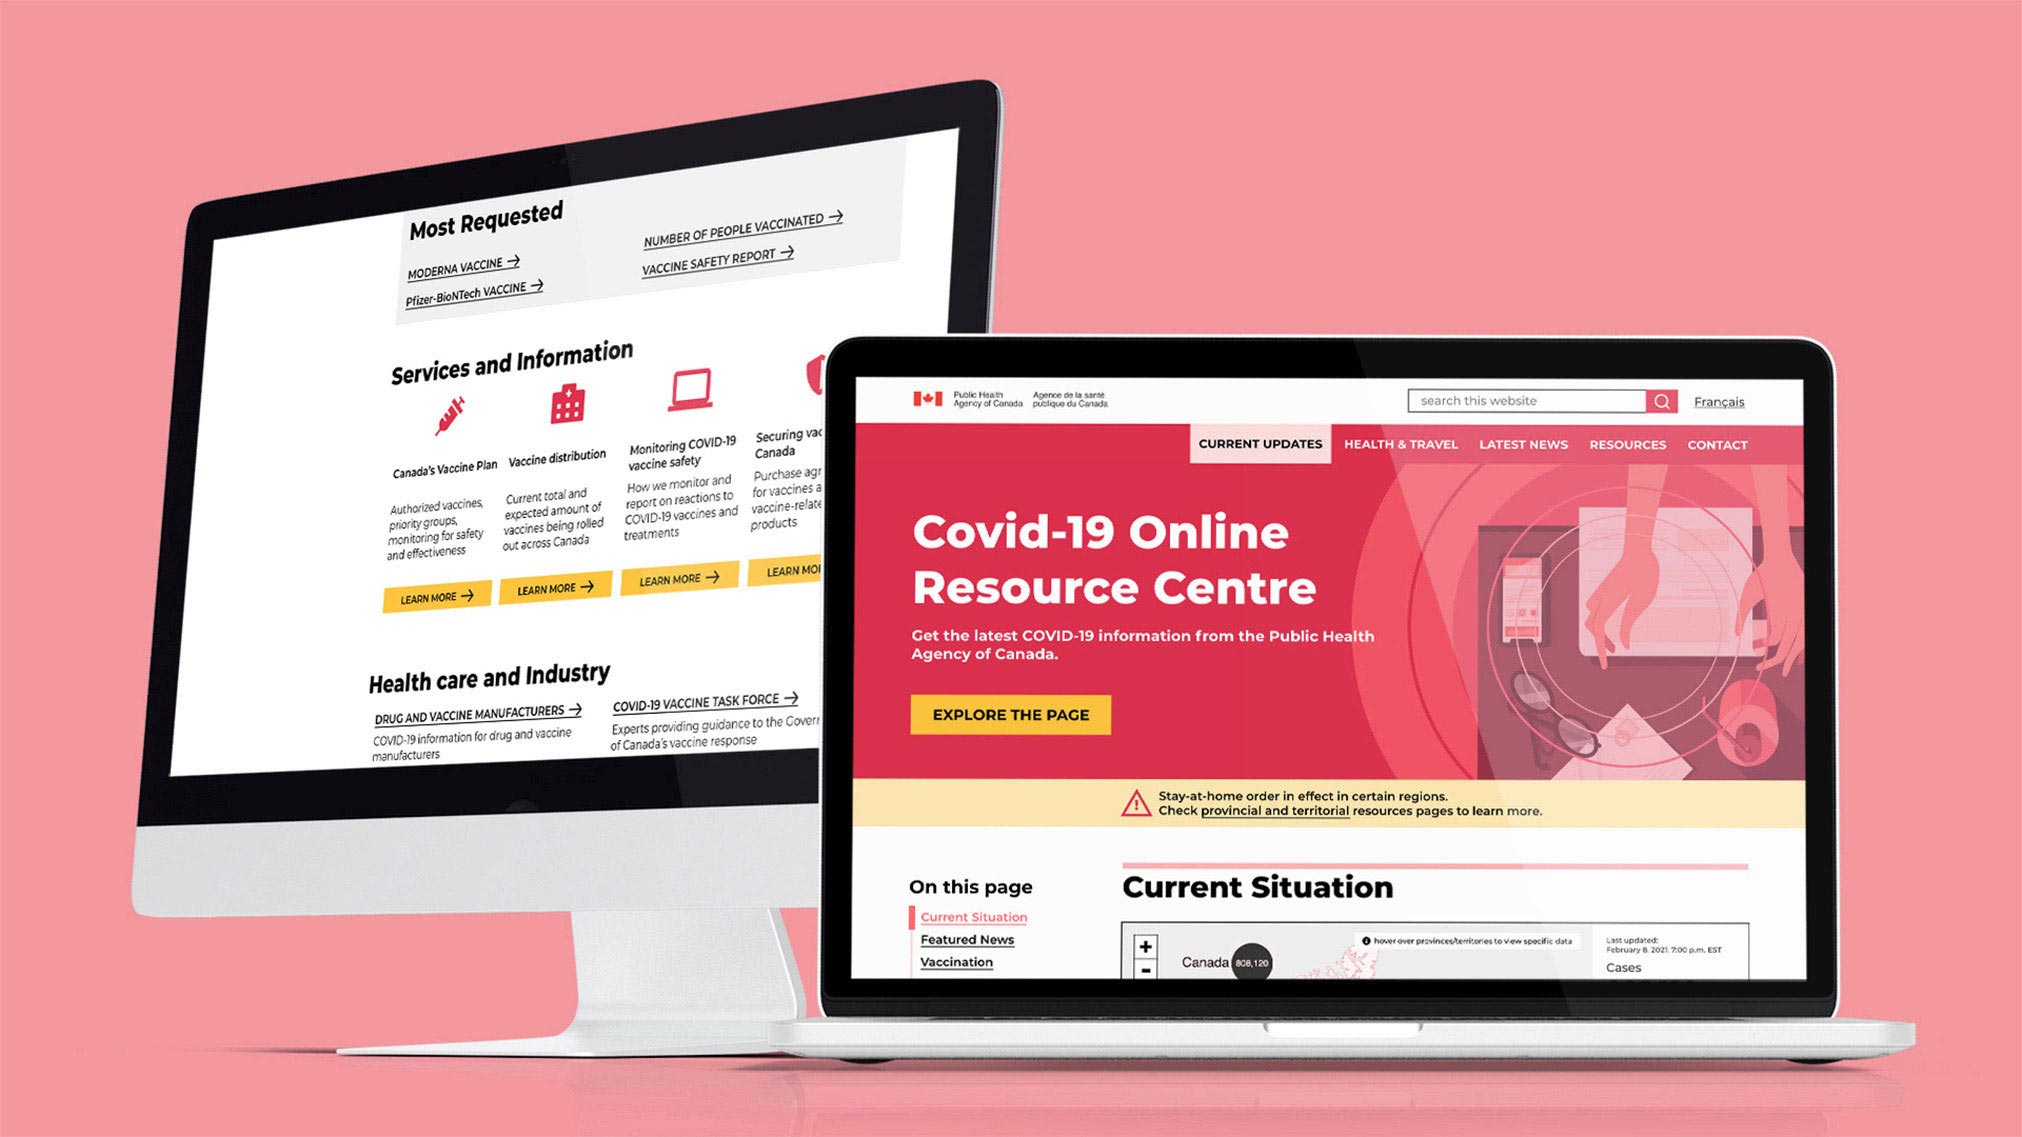 COVID-19 Resources website and email template redesign for The Public Health Agency of Canada.
